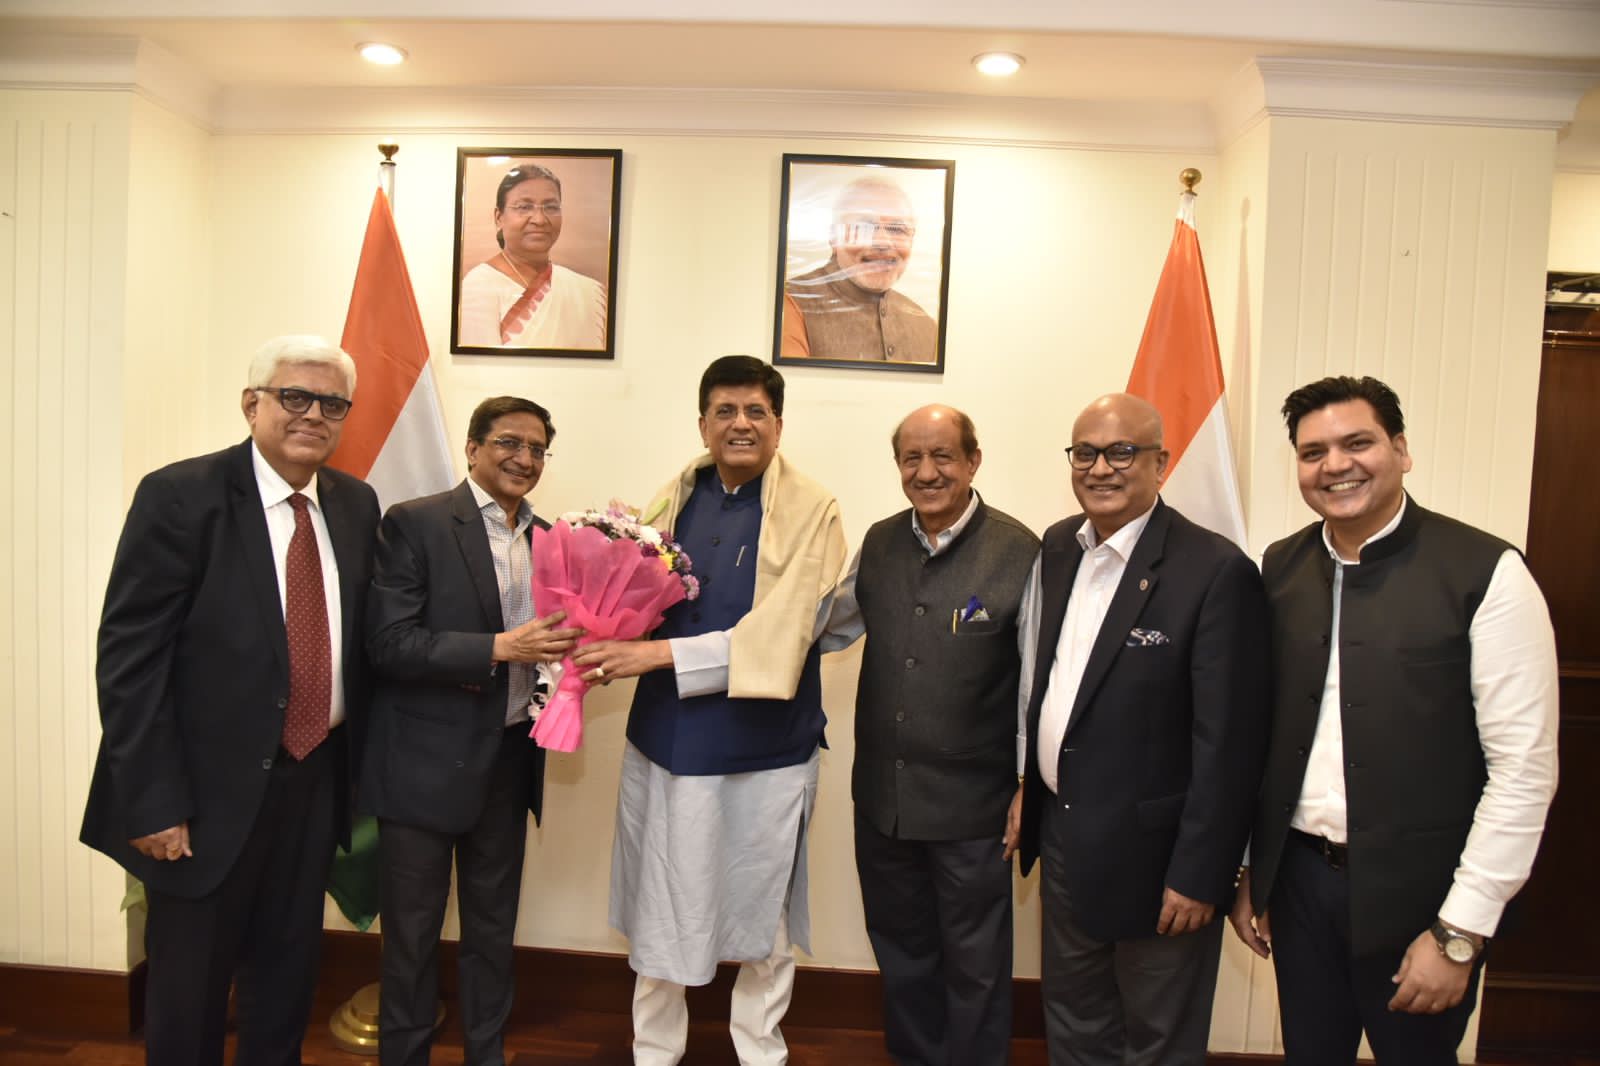 TEXPROCIL Delegation meets Hon’ble Minister of Commerce and Industry & Textiles Shri Piyush Goyal in New Delhi on November 7, 2022